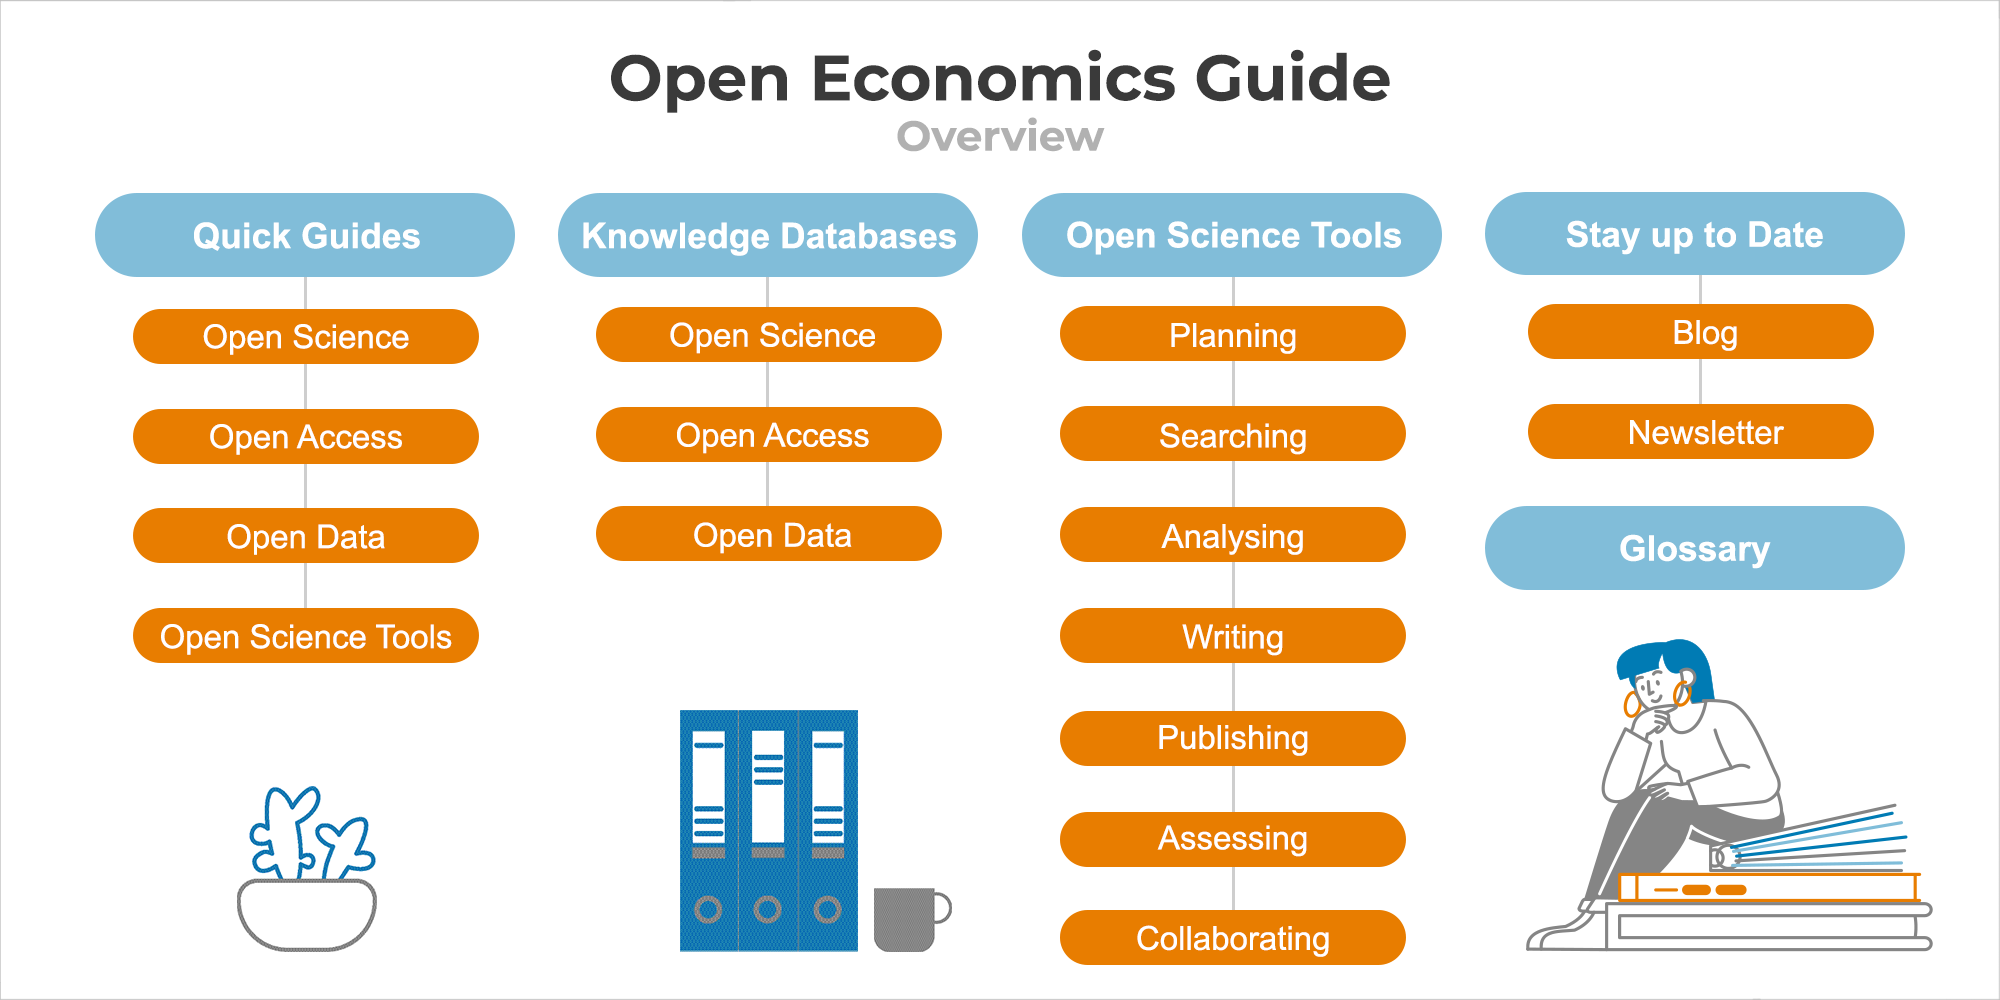 The contents of the Open Science Guide